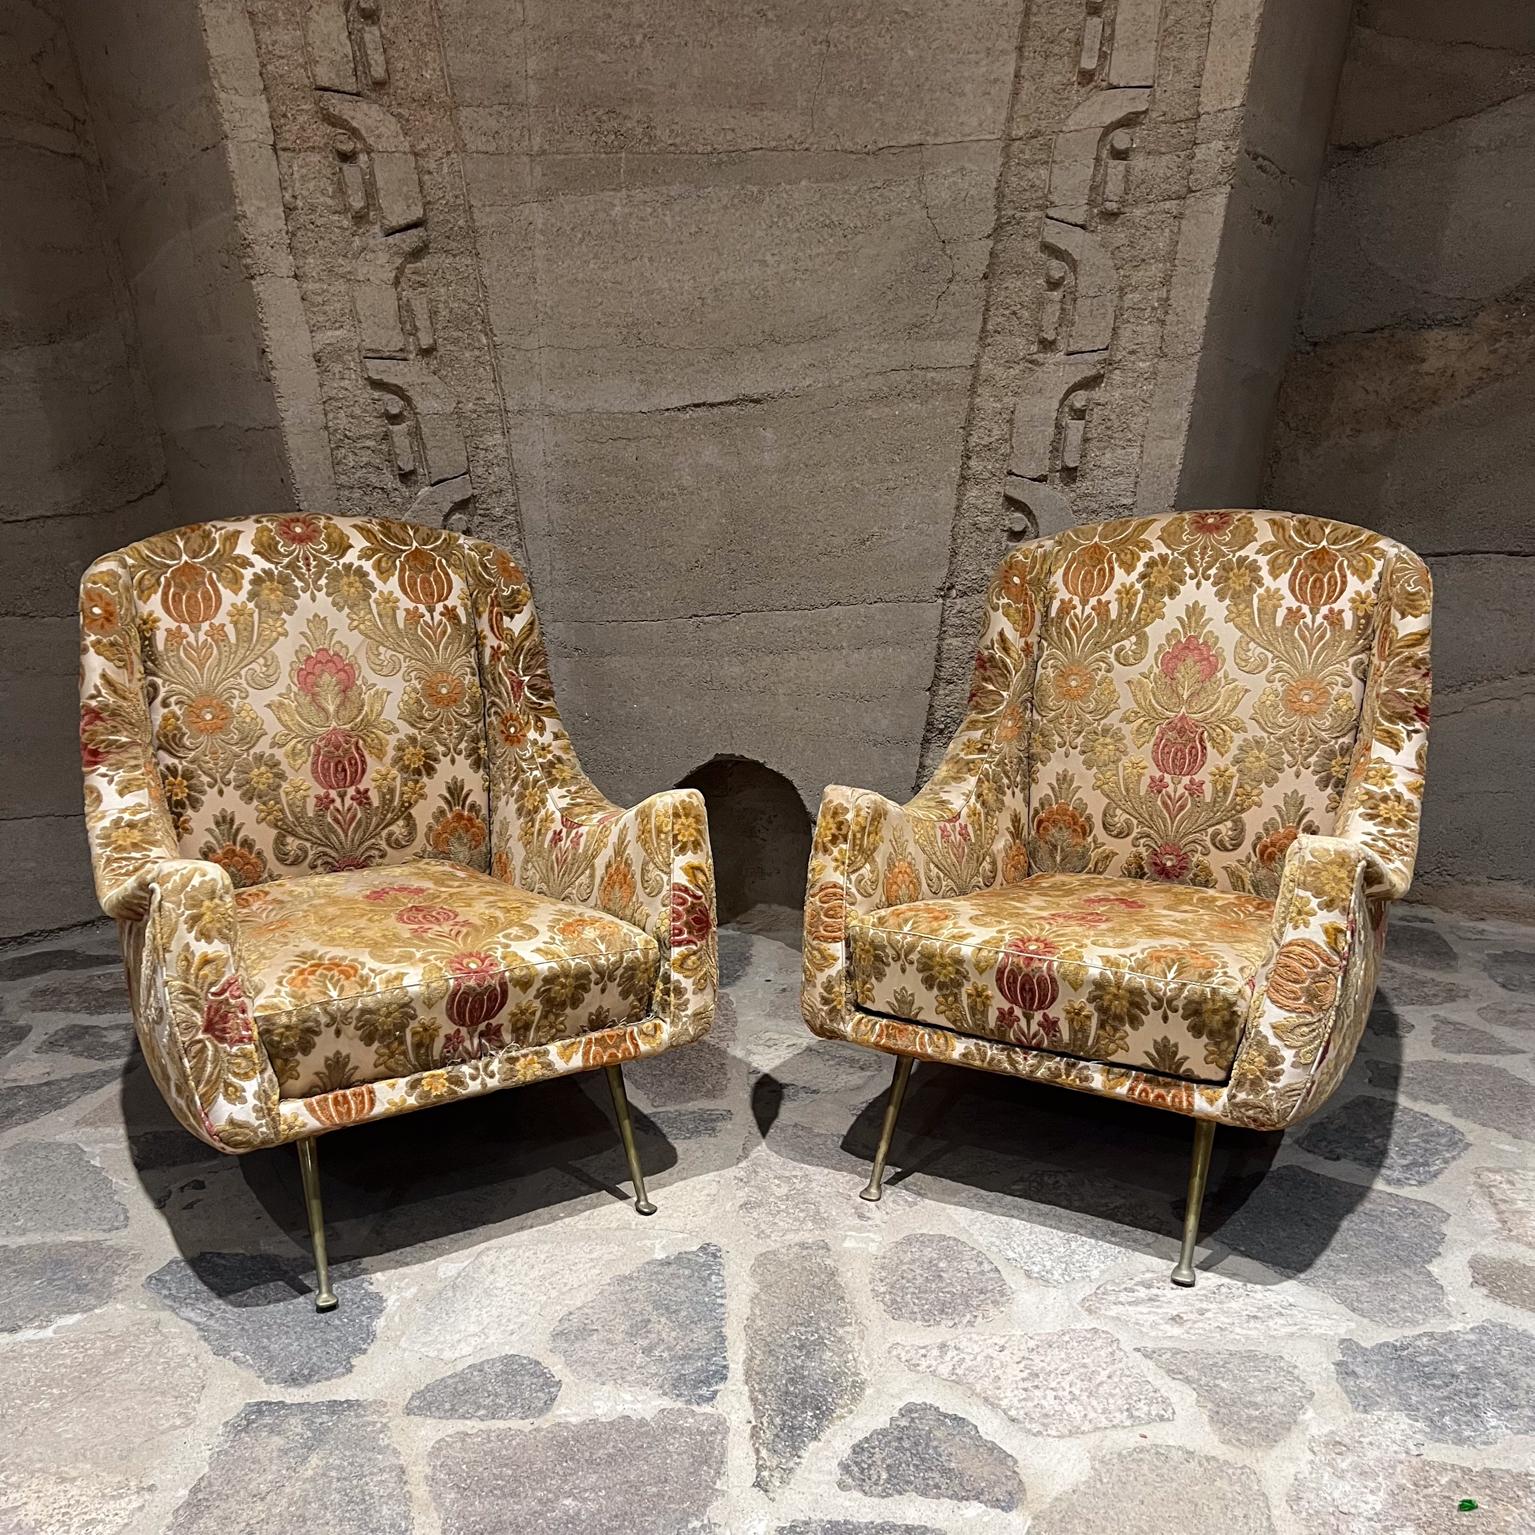 1950s Paolo Buffa attributed sexy lounge chairs made Italy.
selling as a pair
No label present, attributed Paolo Buffa. 
original floral pattern upholstery.
sculptural solid brass legs with vintage patina
31 h x 28 w x 30 d seat 14.25 h 15.5 h